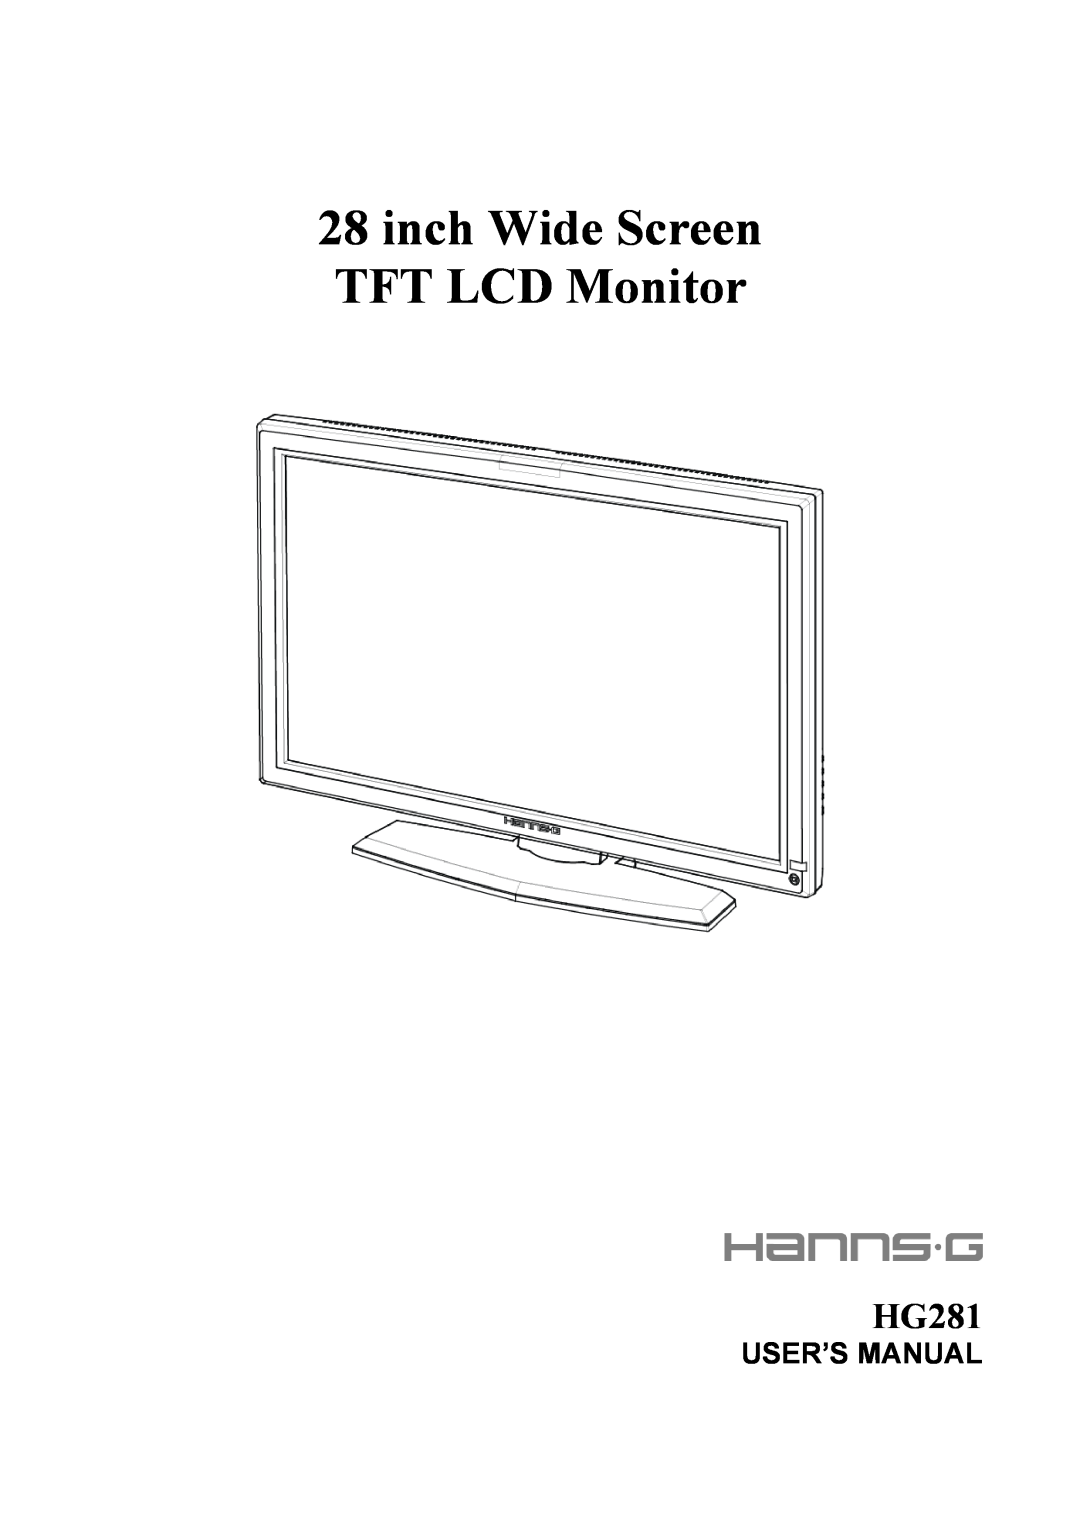 Hanns.G HG281 user manual User’S Manual, inch Wide Screen TFT LCD Monitor 